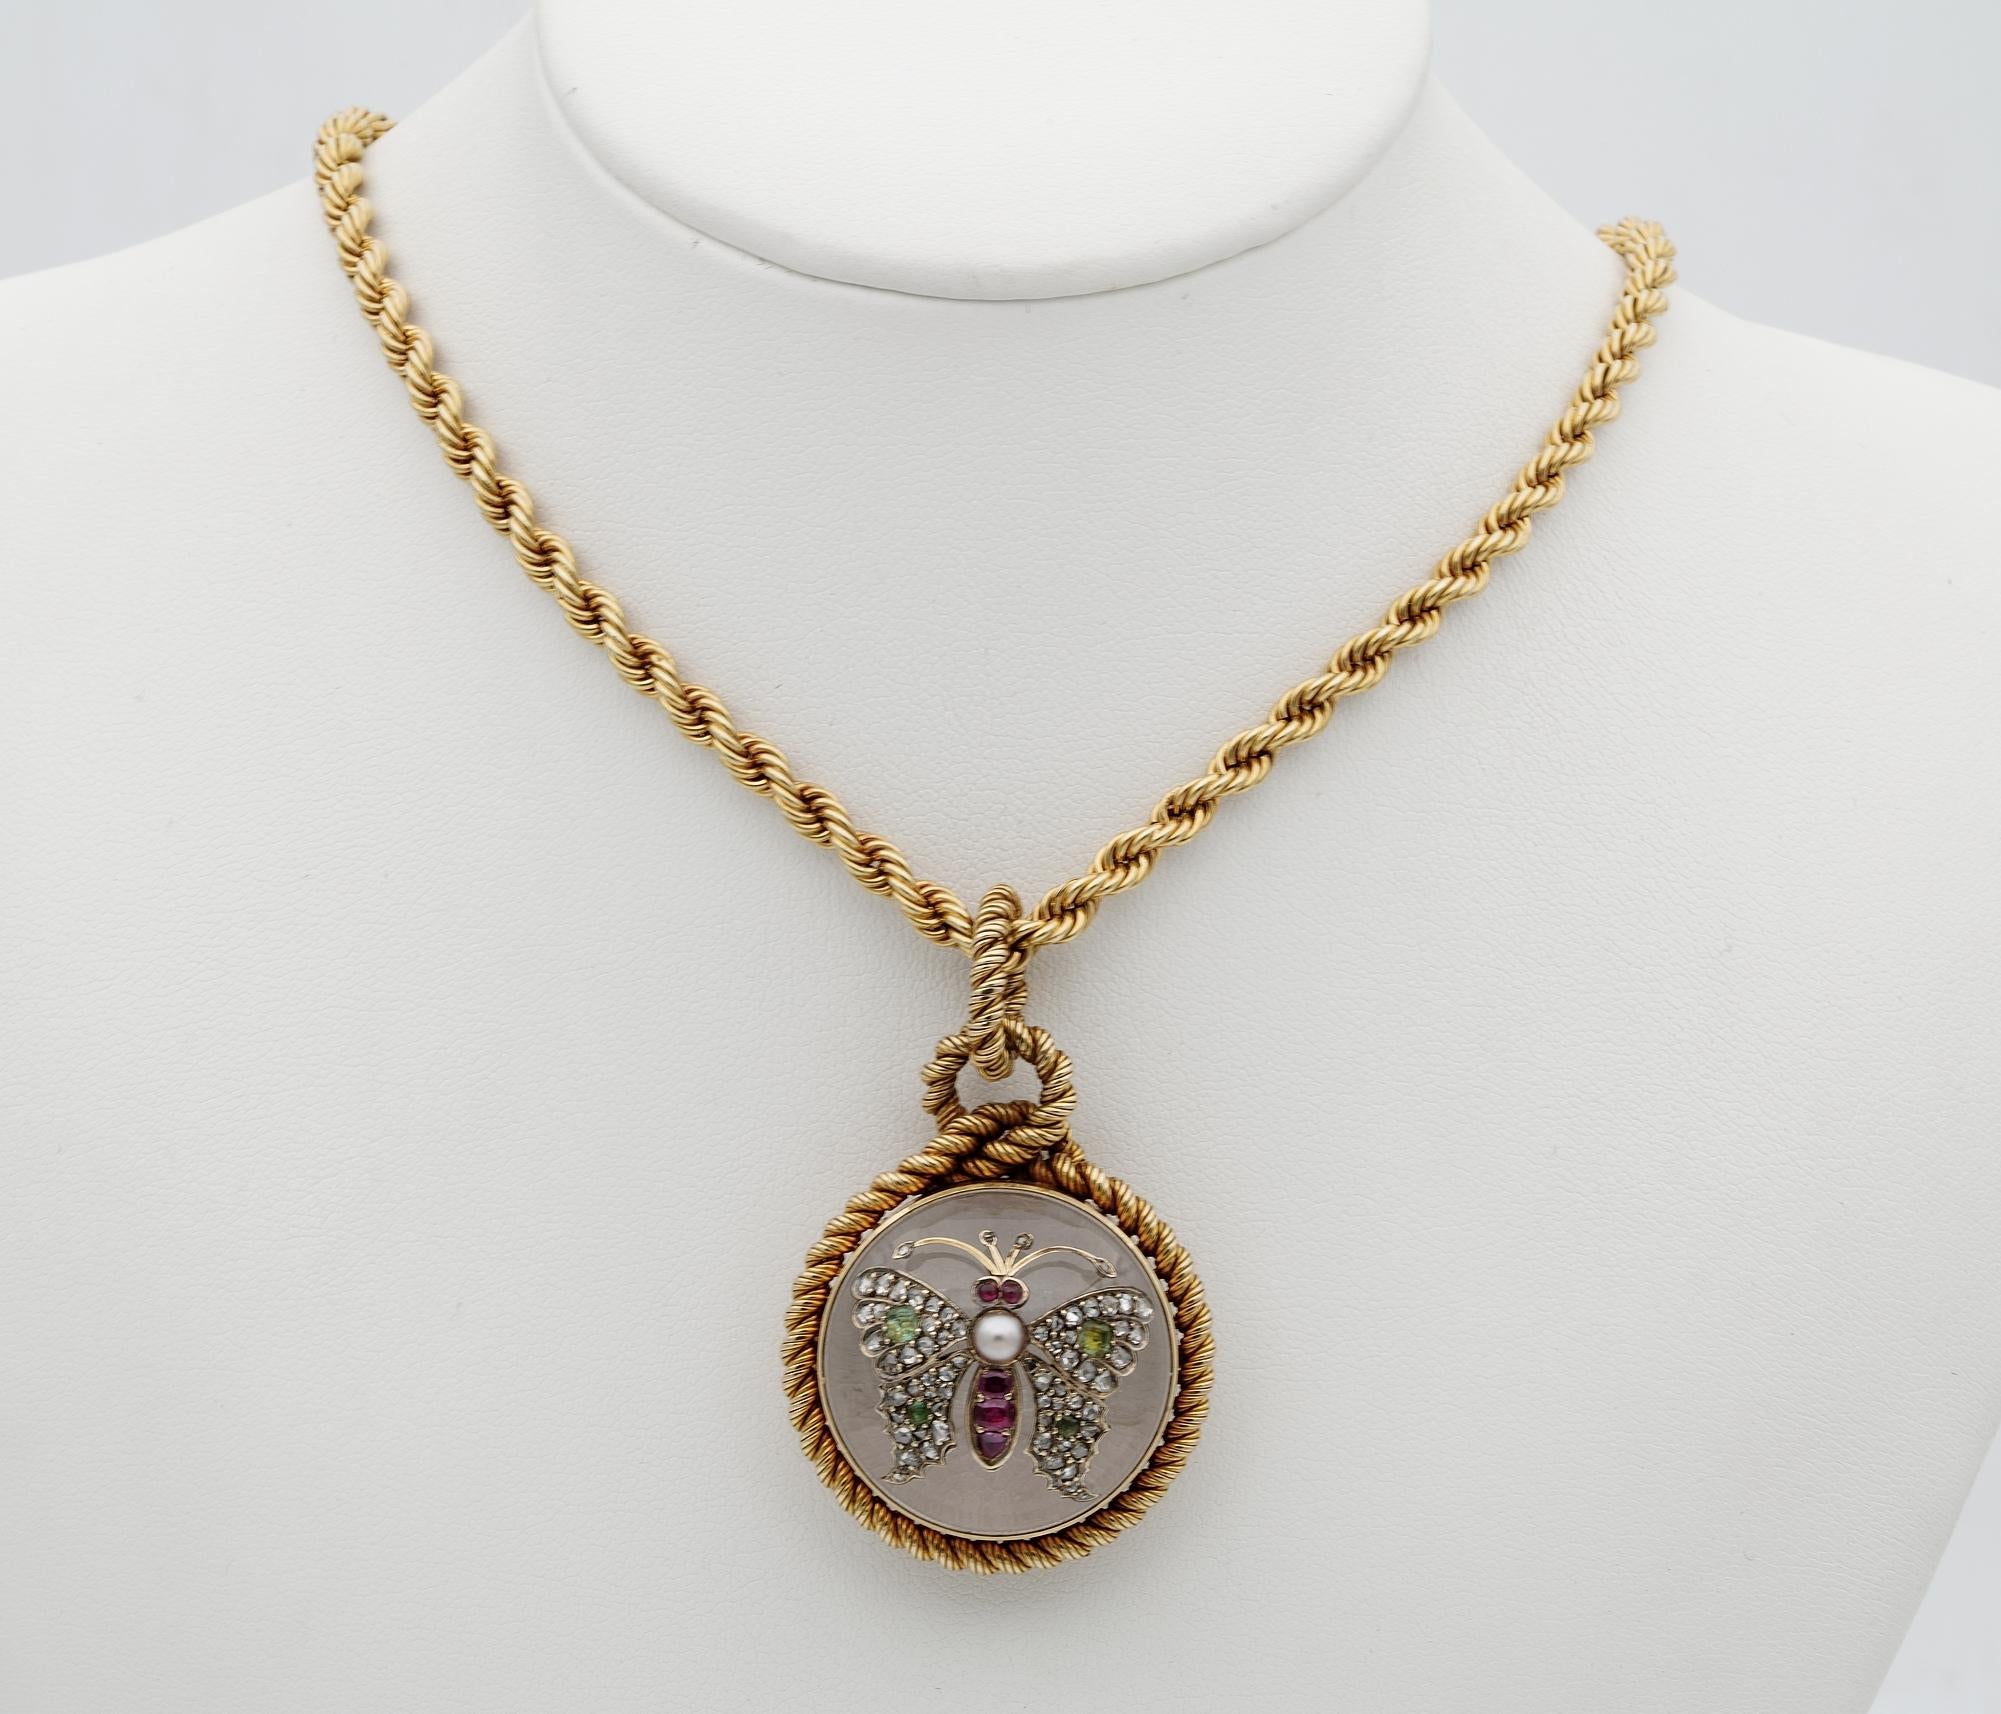 Victorian Marvel
A very rare Victorian period locket pendant plus chain – French origin 1860/1880 ca
The large locket is of circular shape carved from polished Rock Crystal – nestled into gold hinged lock work with an interlaced rope knotted frame,